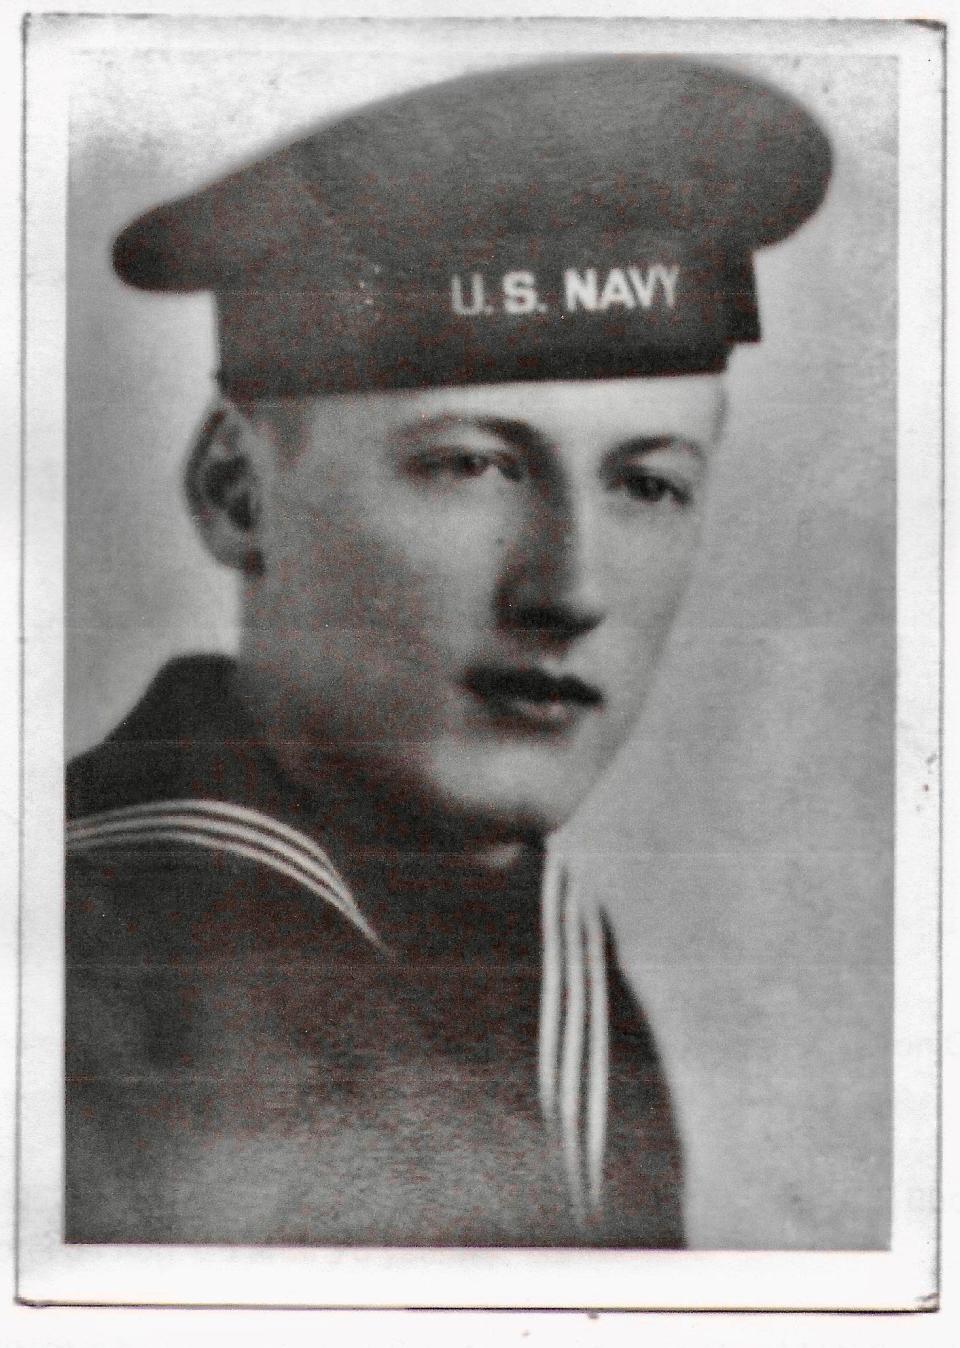 Kenneth Bladen shortly after joining the U.S. Navy in 1943.